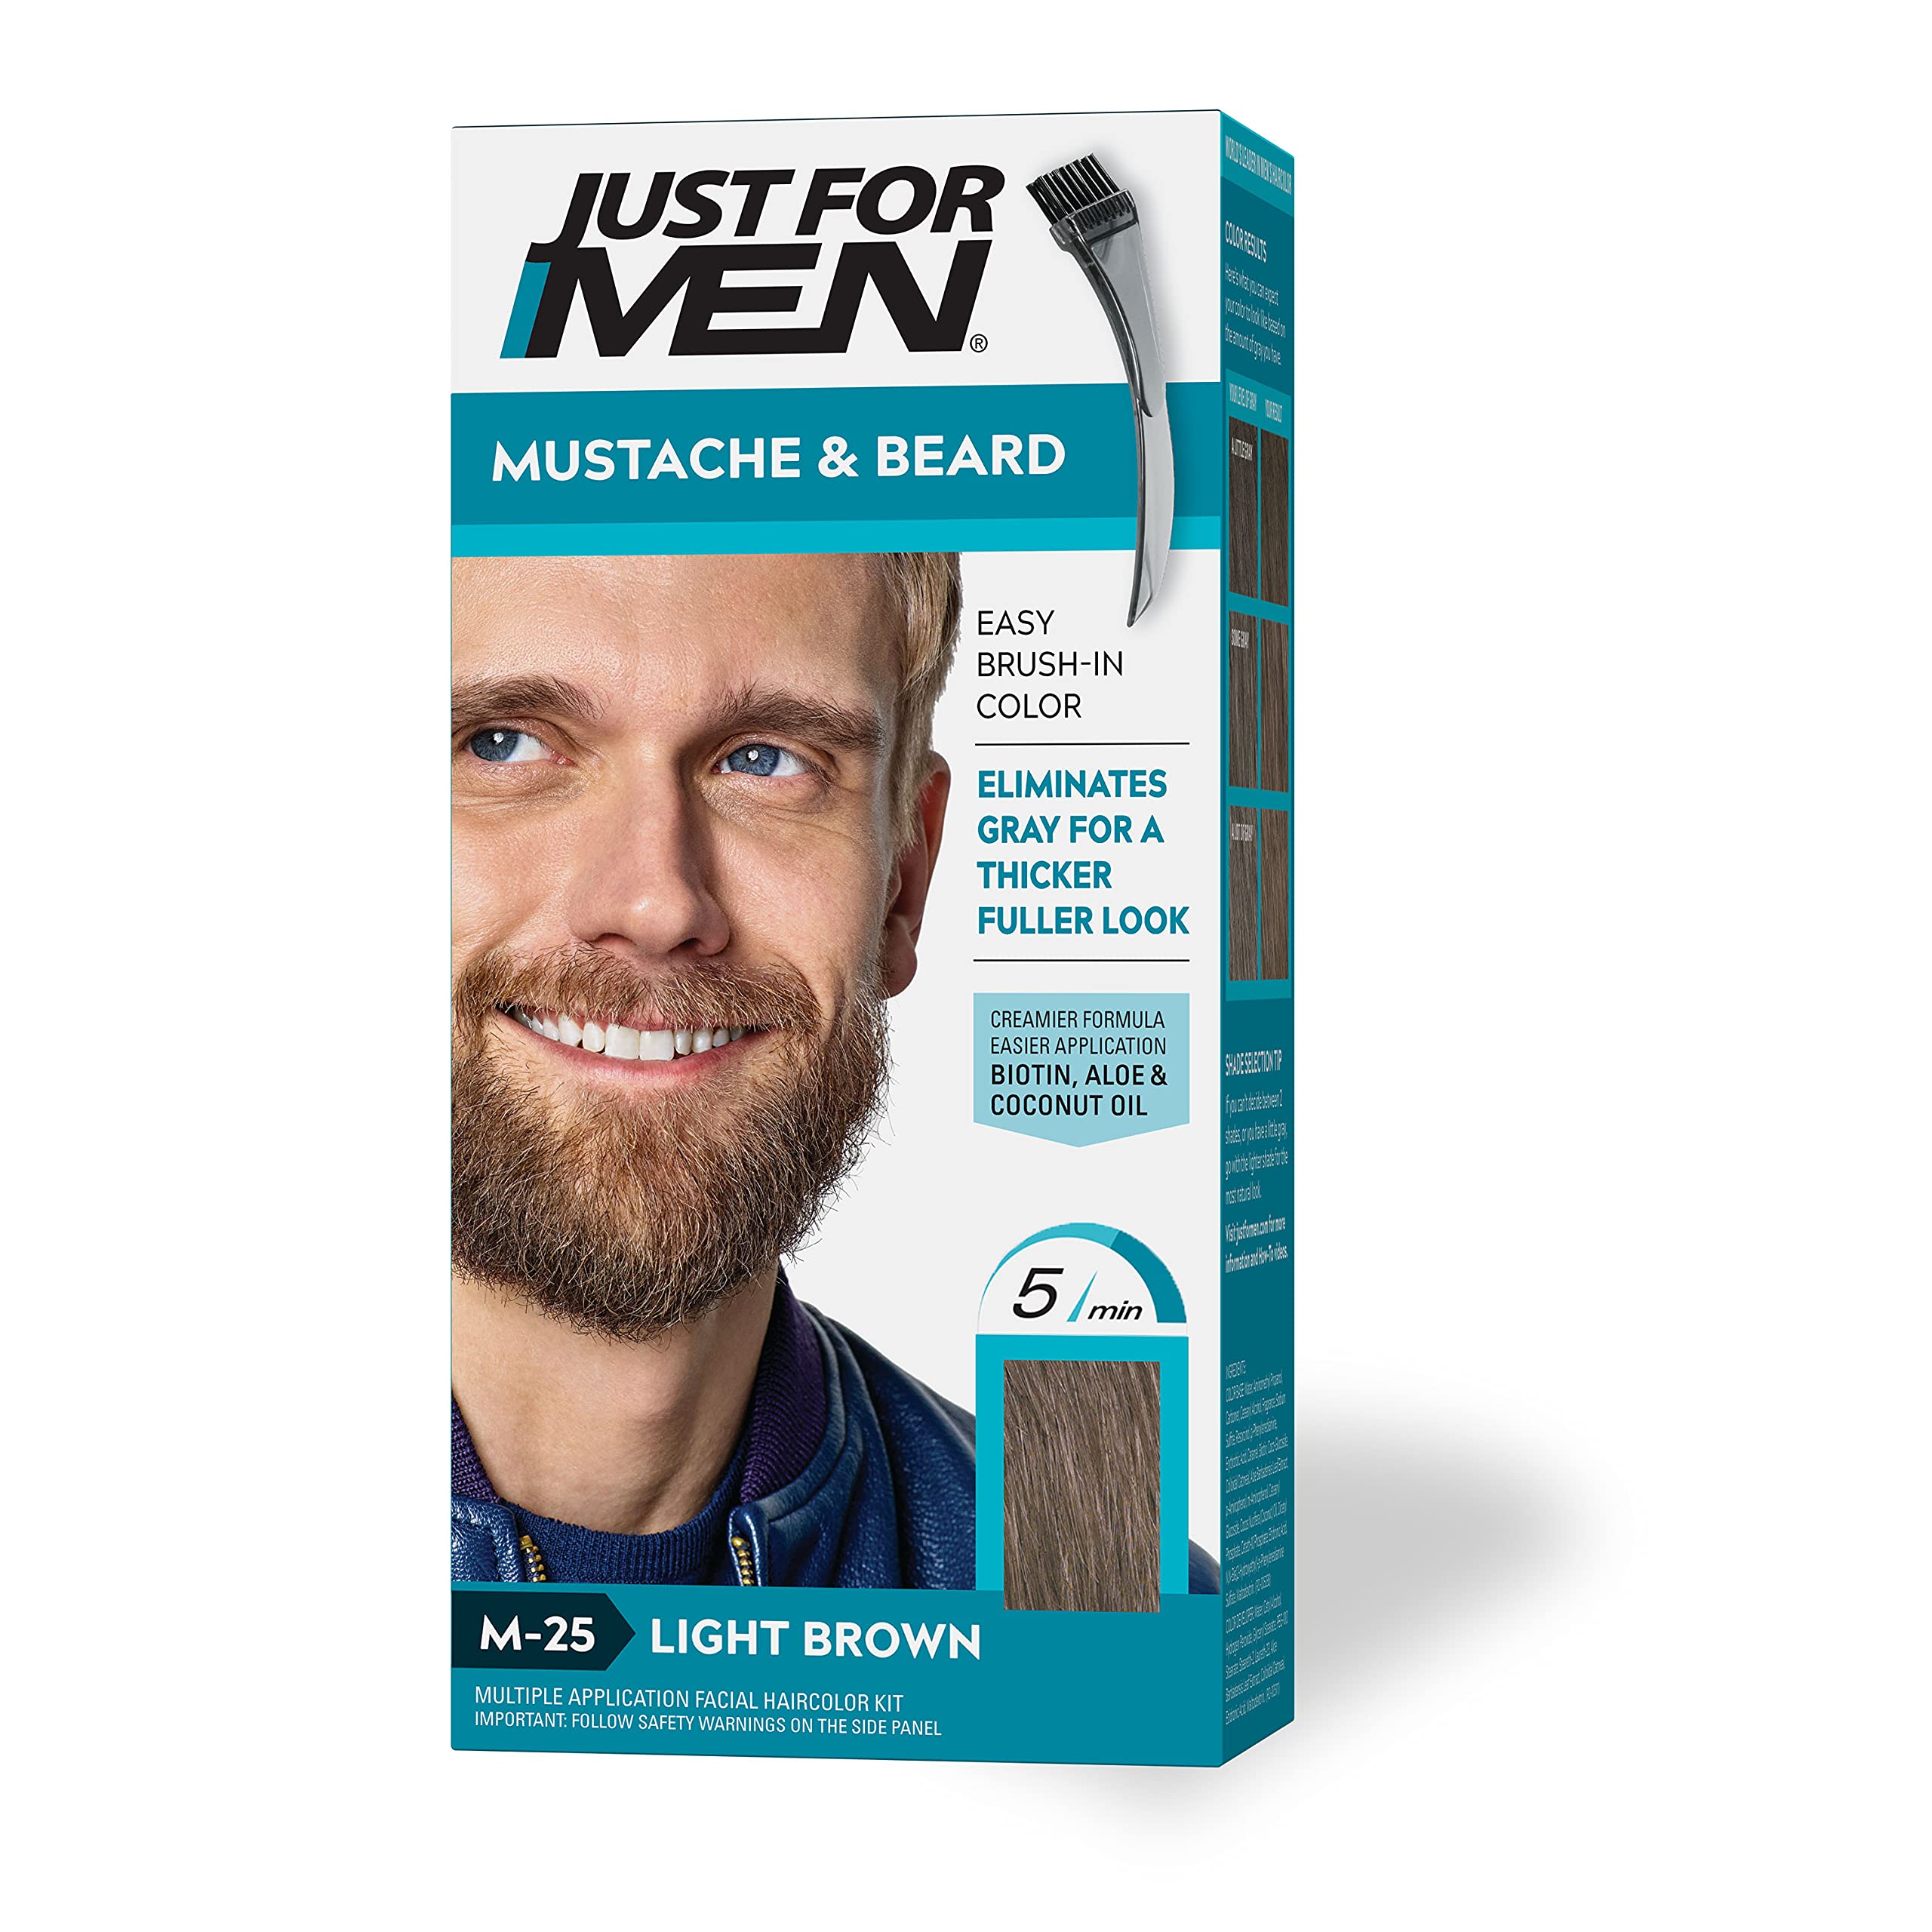 Just For Men Mustache & Beard, Beard Dye for Men with Brush Included for Easy Application, With Biotin Aloe and Coconut Oil for Healthy Facial Hair - Light Brown, M-25, Pack of 1